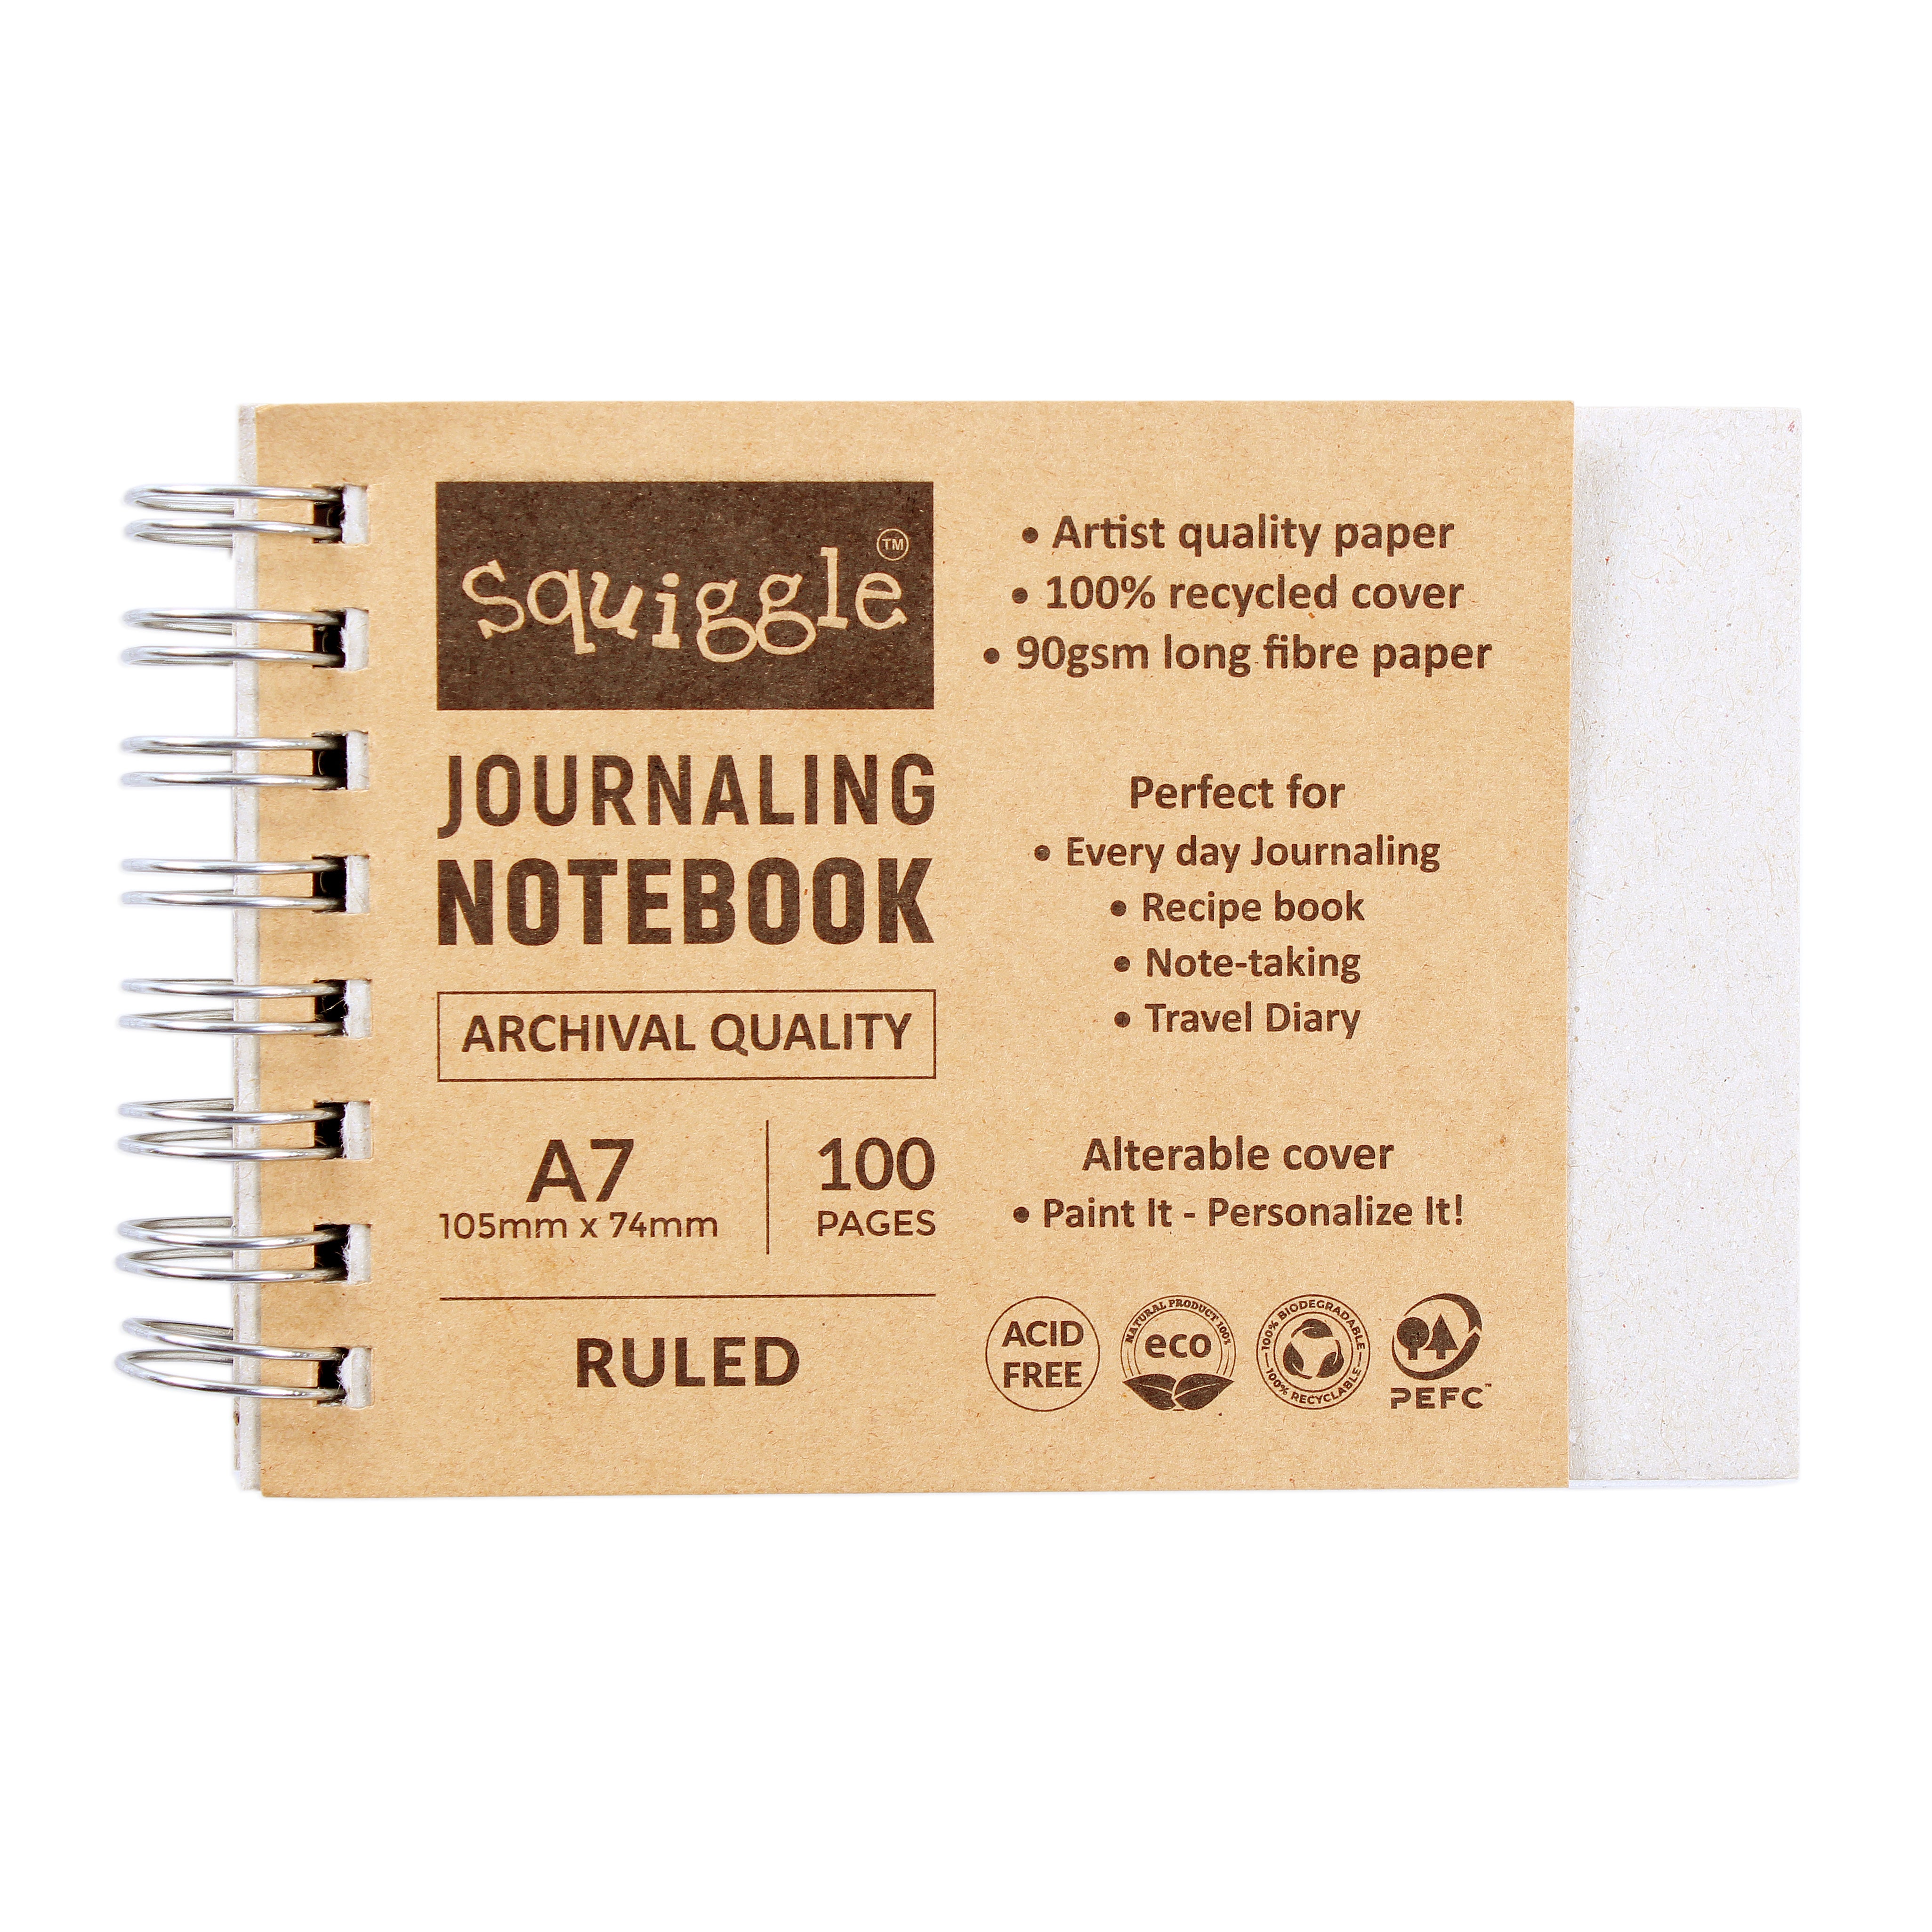 Journaling Notebook Premium Quality A7 Ruled 90Gsm Wiro Squiggle 100Pages Lb